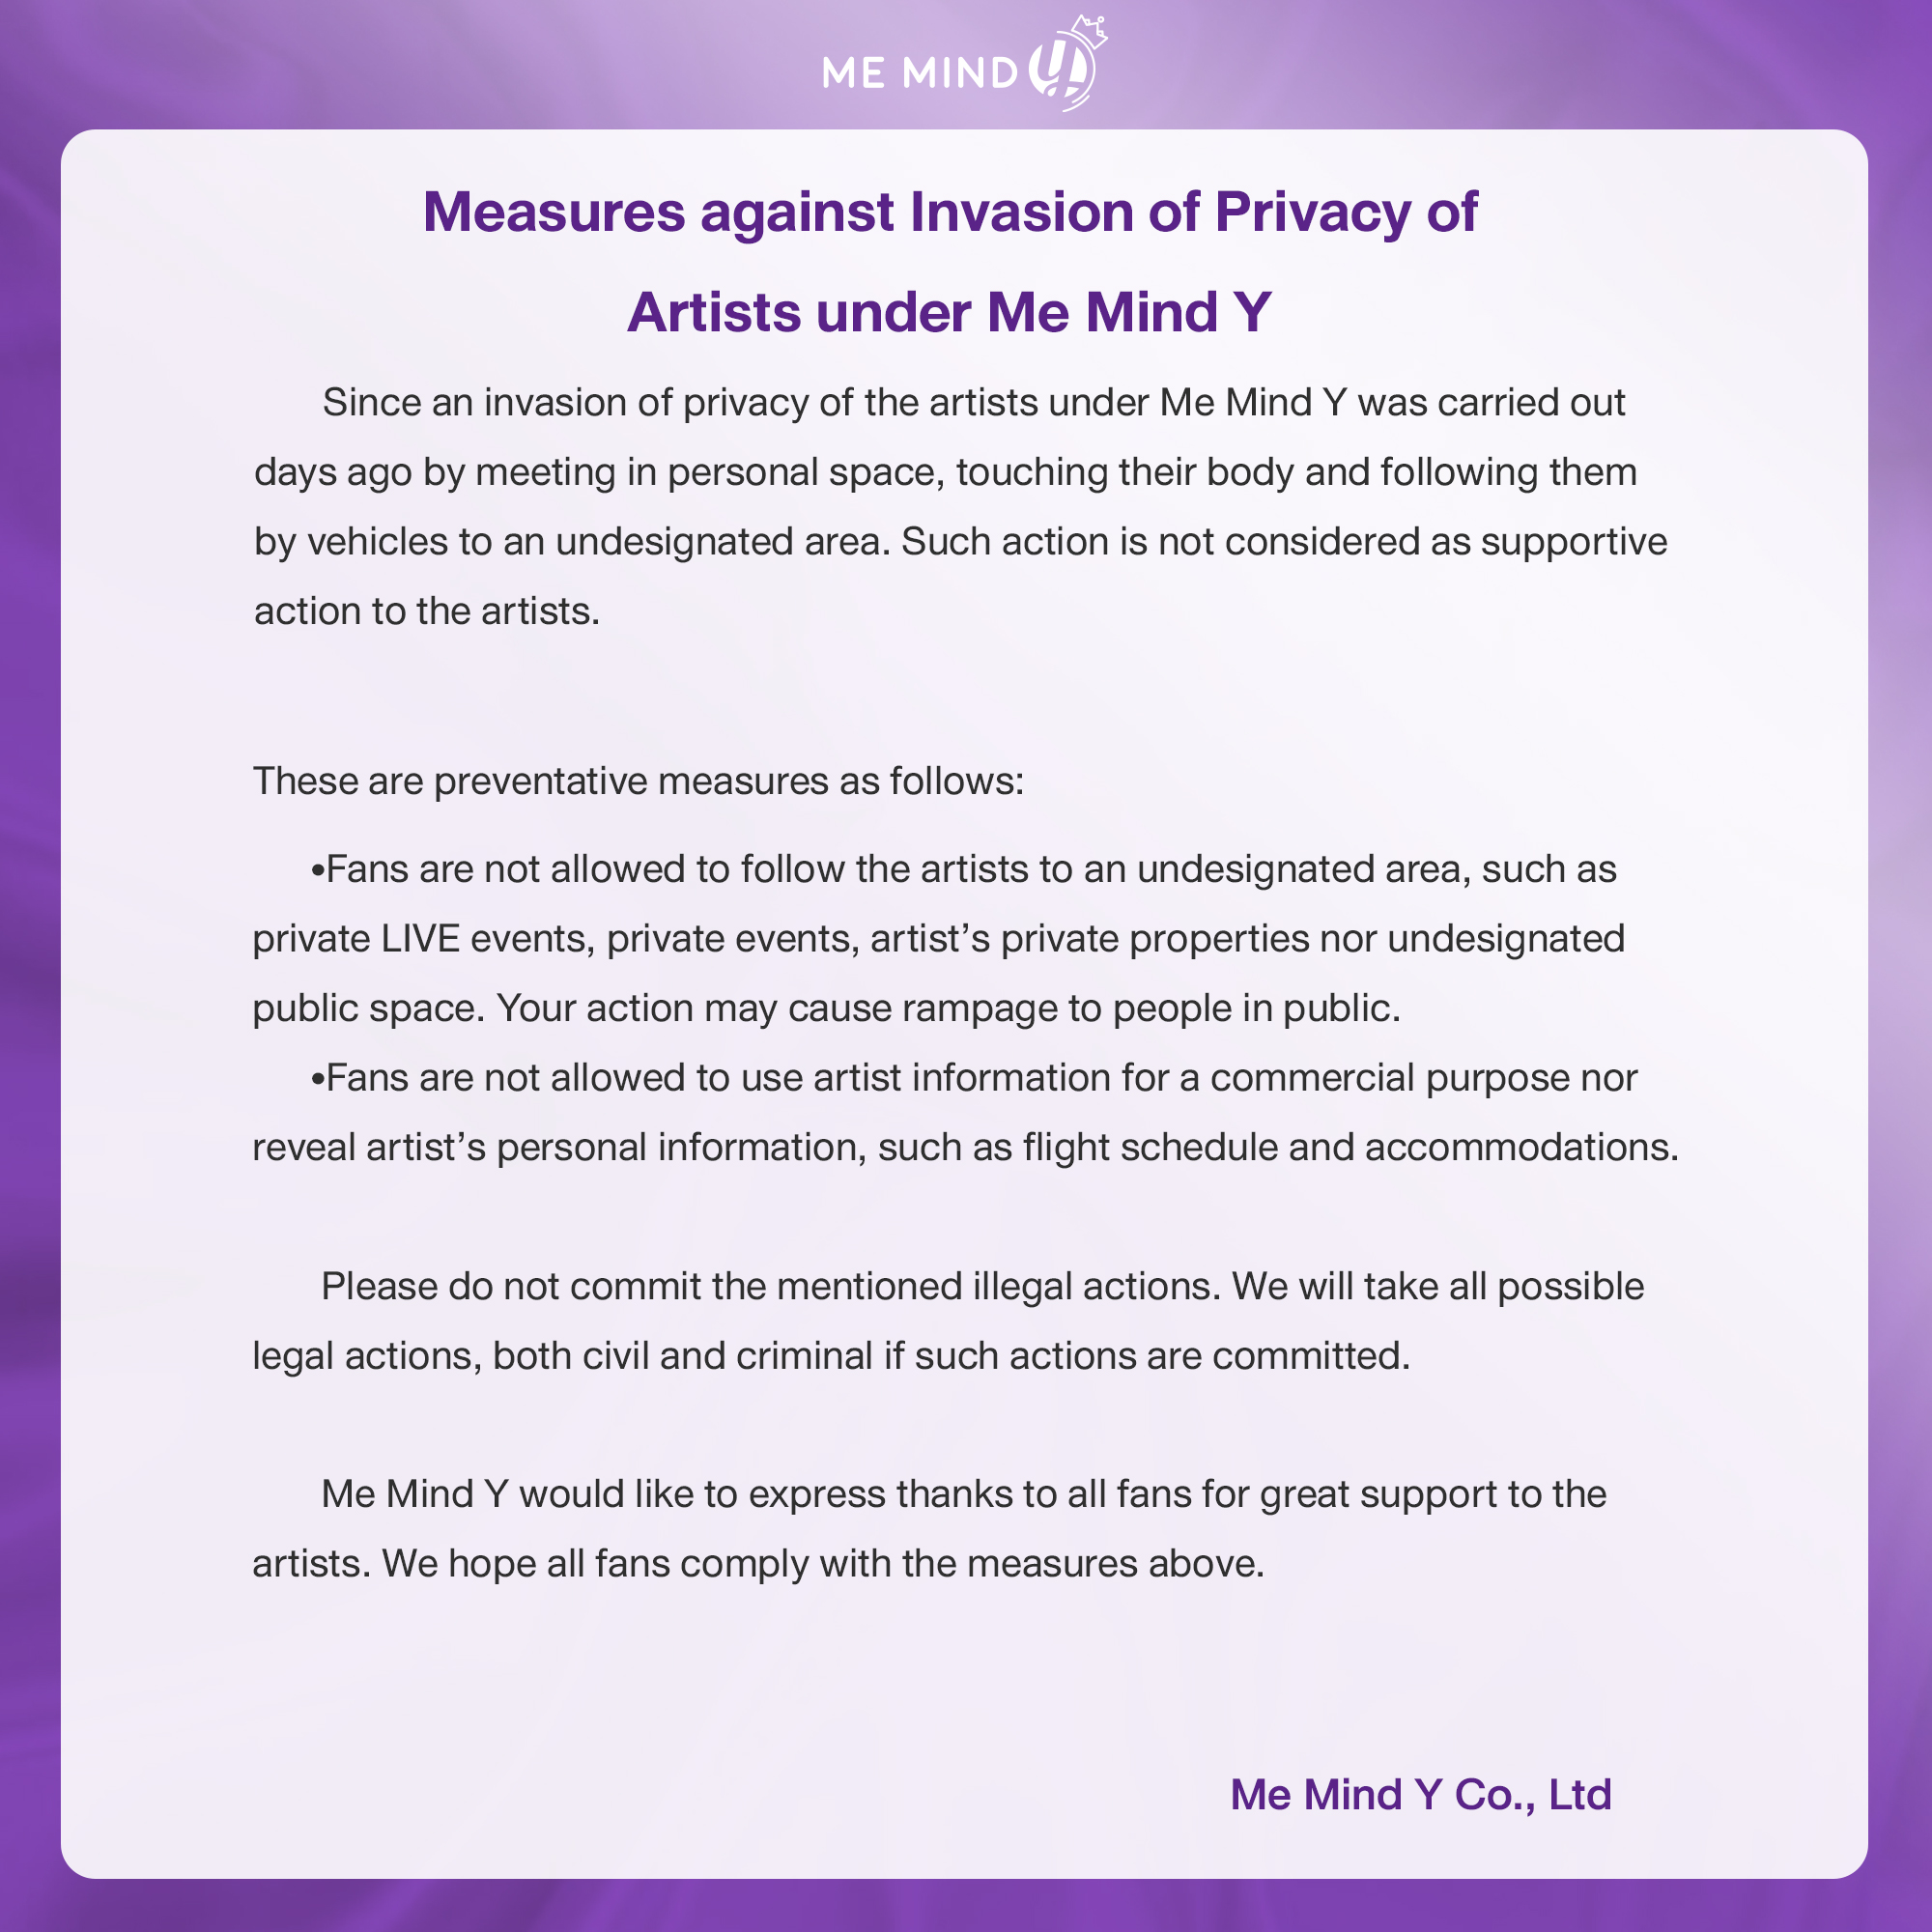 MeMindY Reminds Fans Not to Invade Privacy